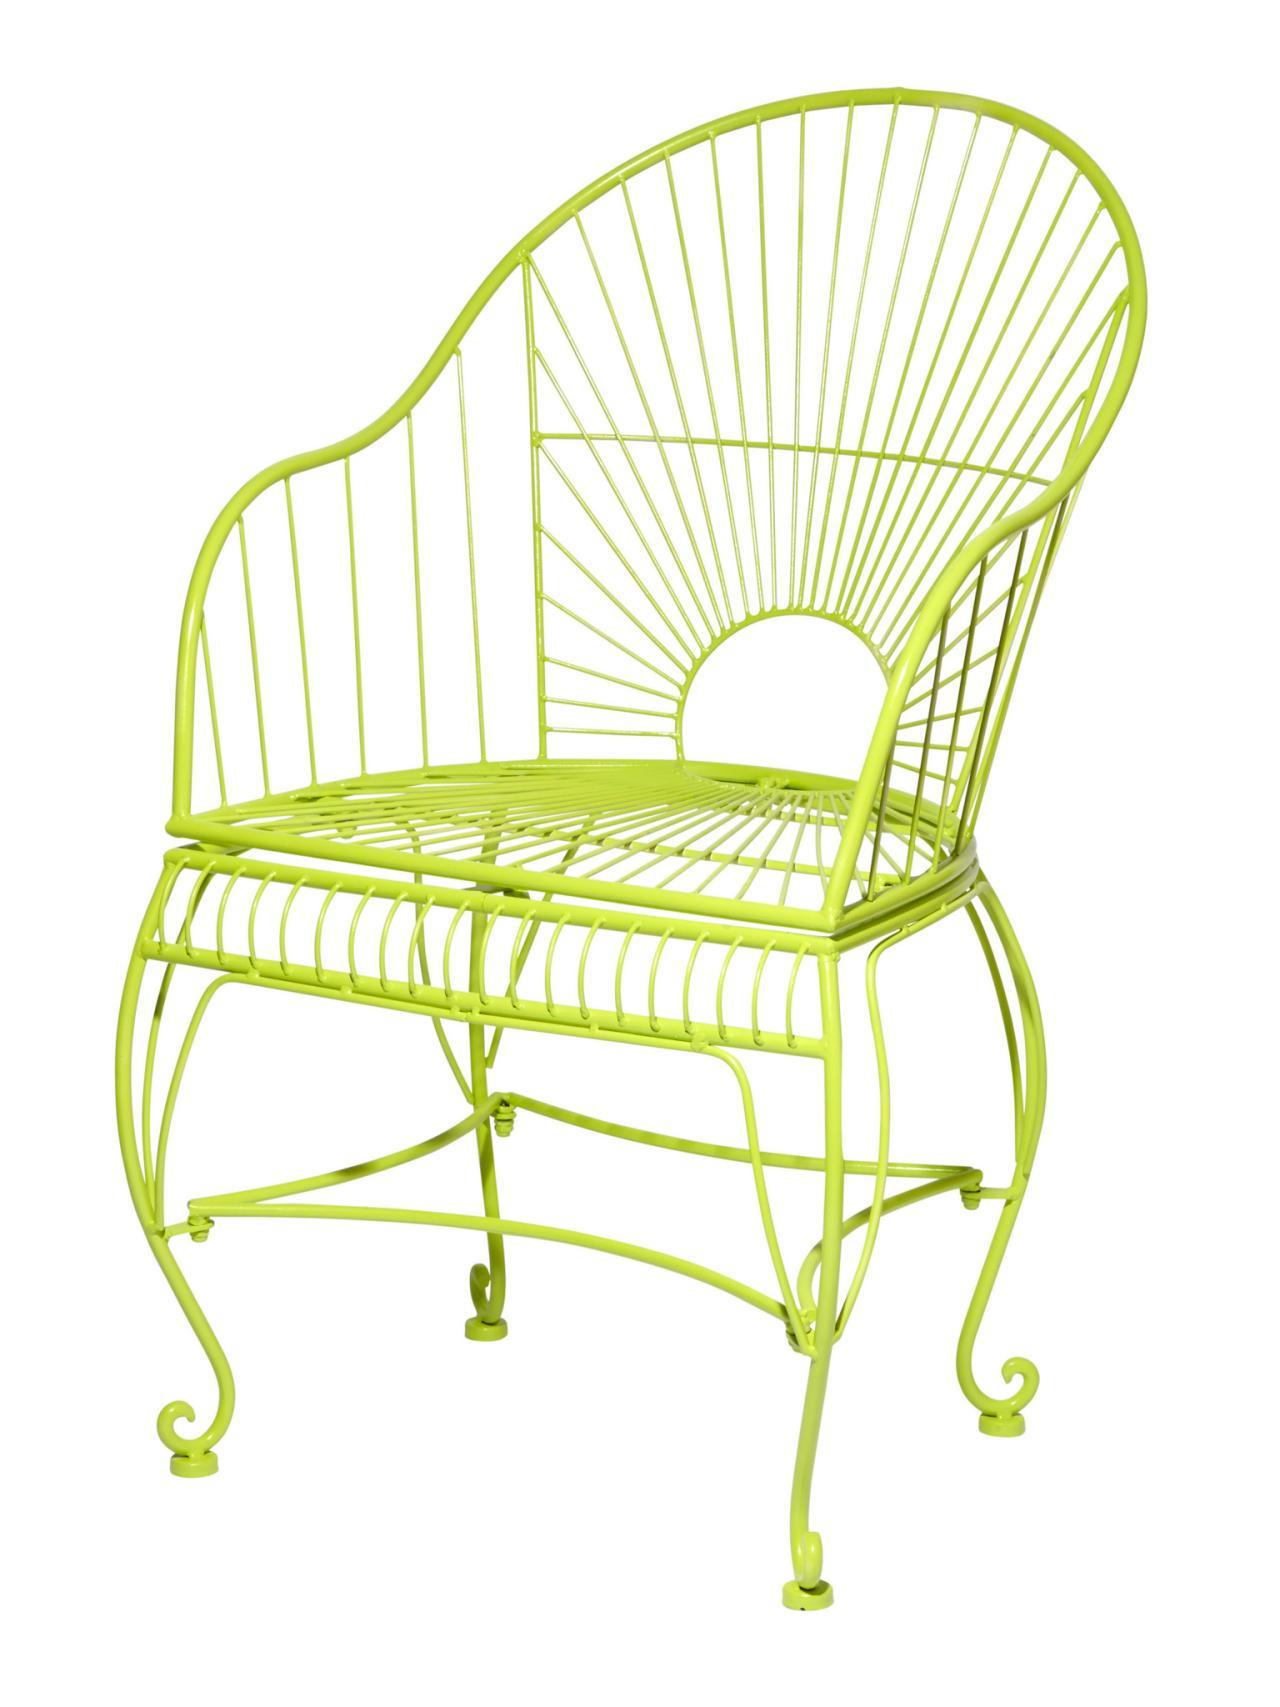 How To Paint Wrought Iron Furniture, Colors To Paint Wrought Iron Patio Furniture